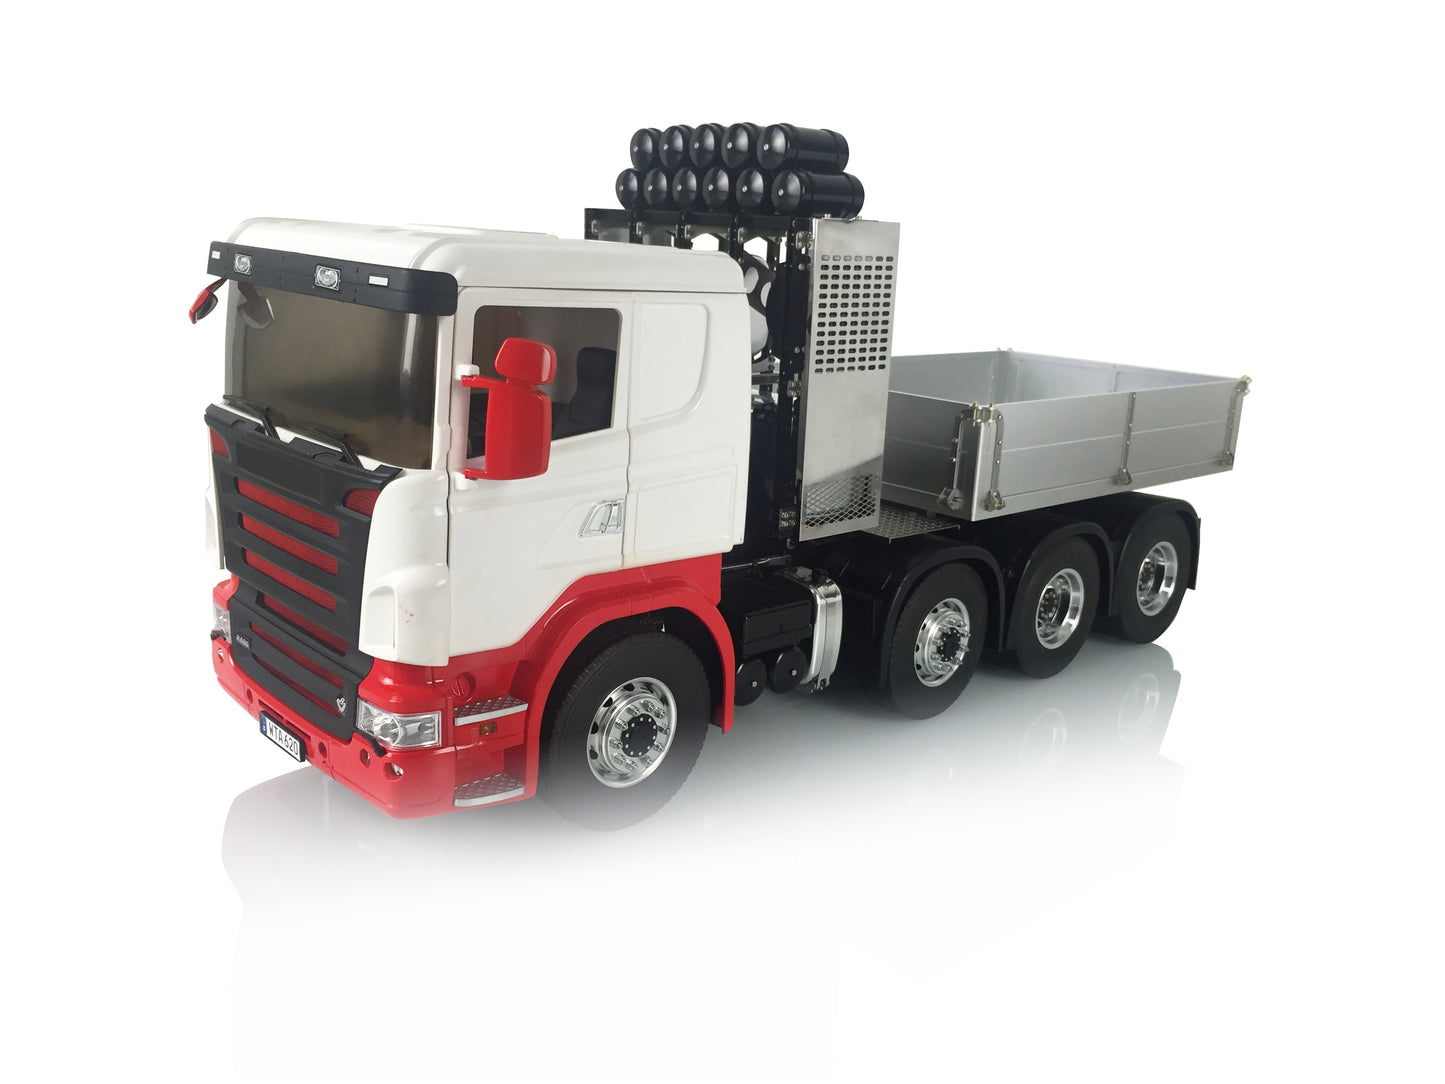 1/14 8*8 LESU Kit RC Painted Tractor Truck Car Model Metal Chassis W/ Equipment Rack Light Sound Servo Cabin Roof